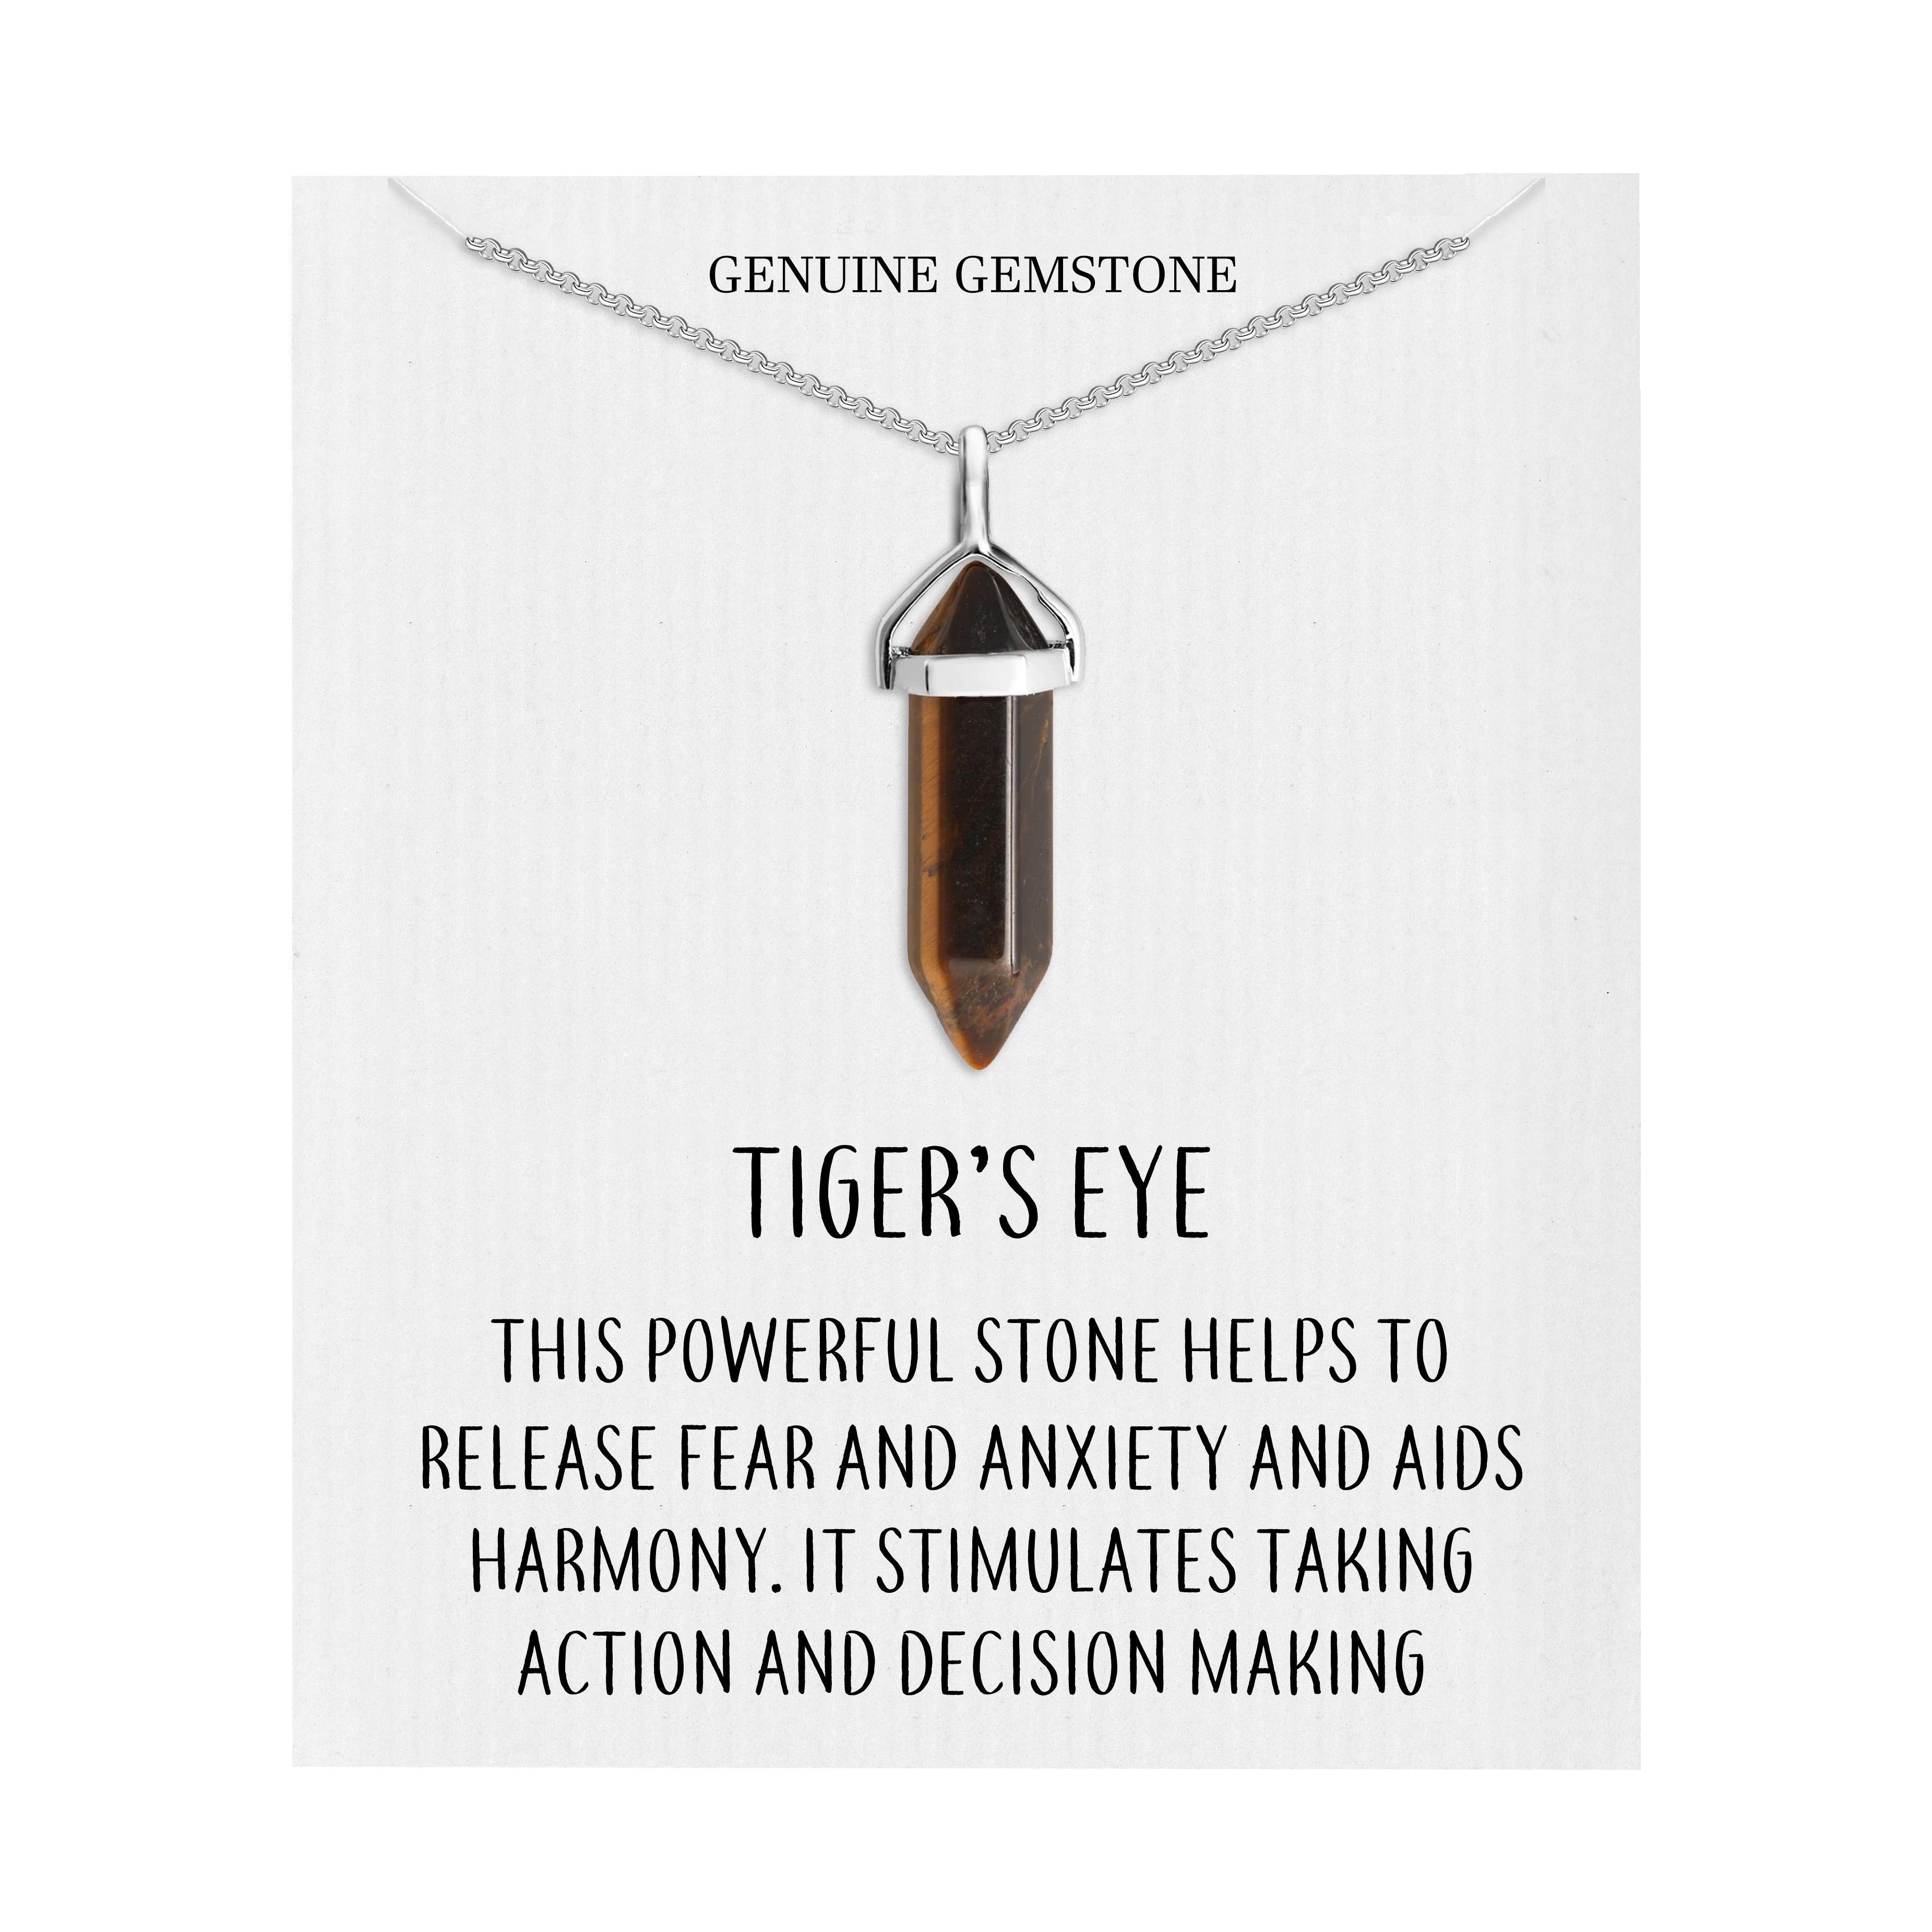 Tiger's Eye Gemstone Necklace with Quote Card